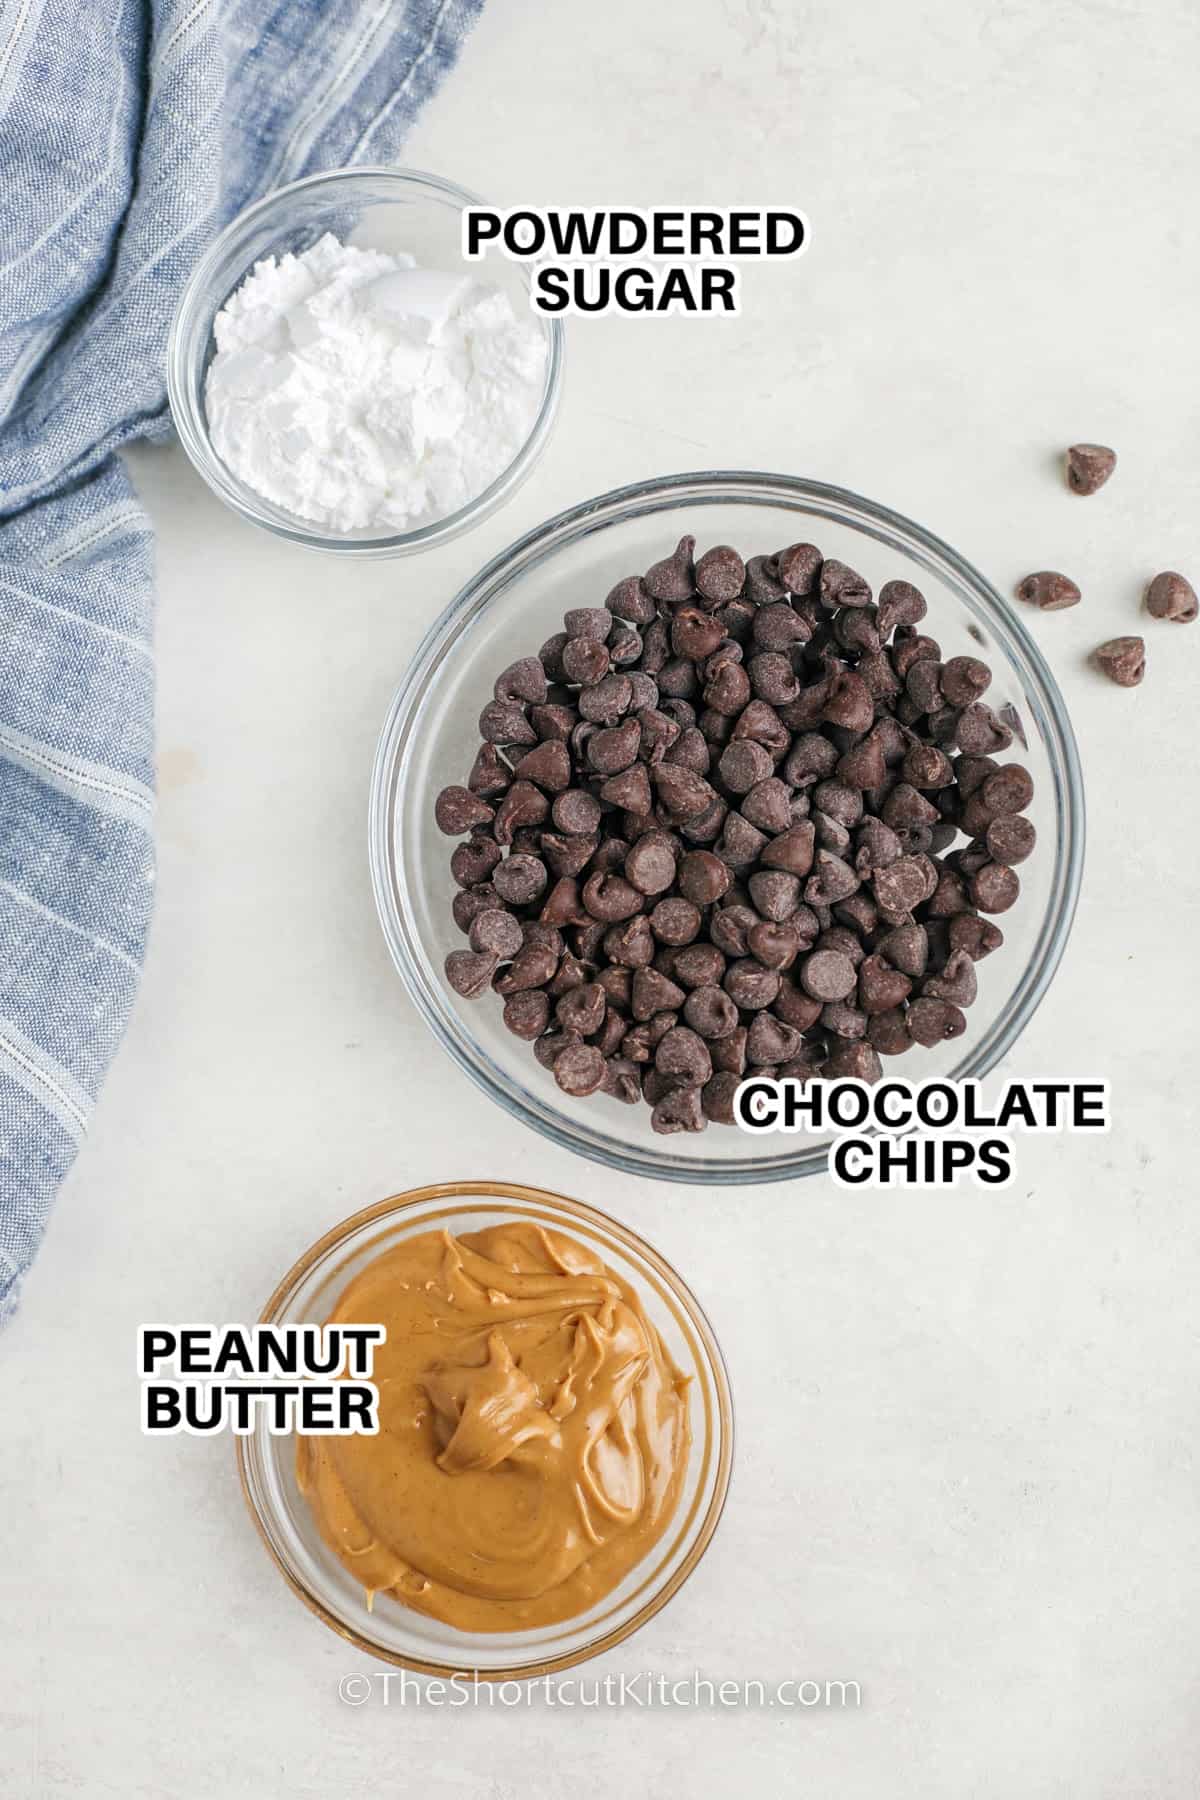 Ingredients to make homemade peanut butter cups labeled: powdered sugar, chocolate chips, peanut butter